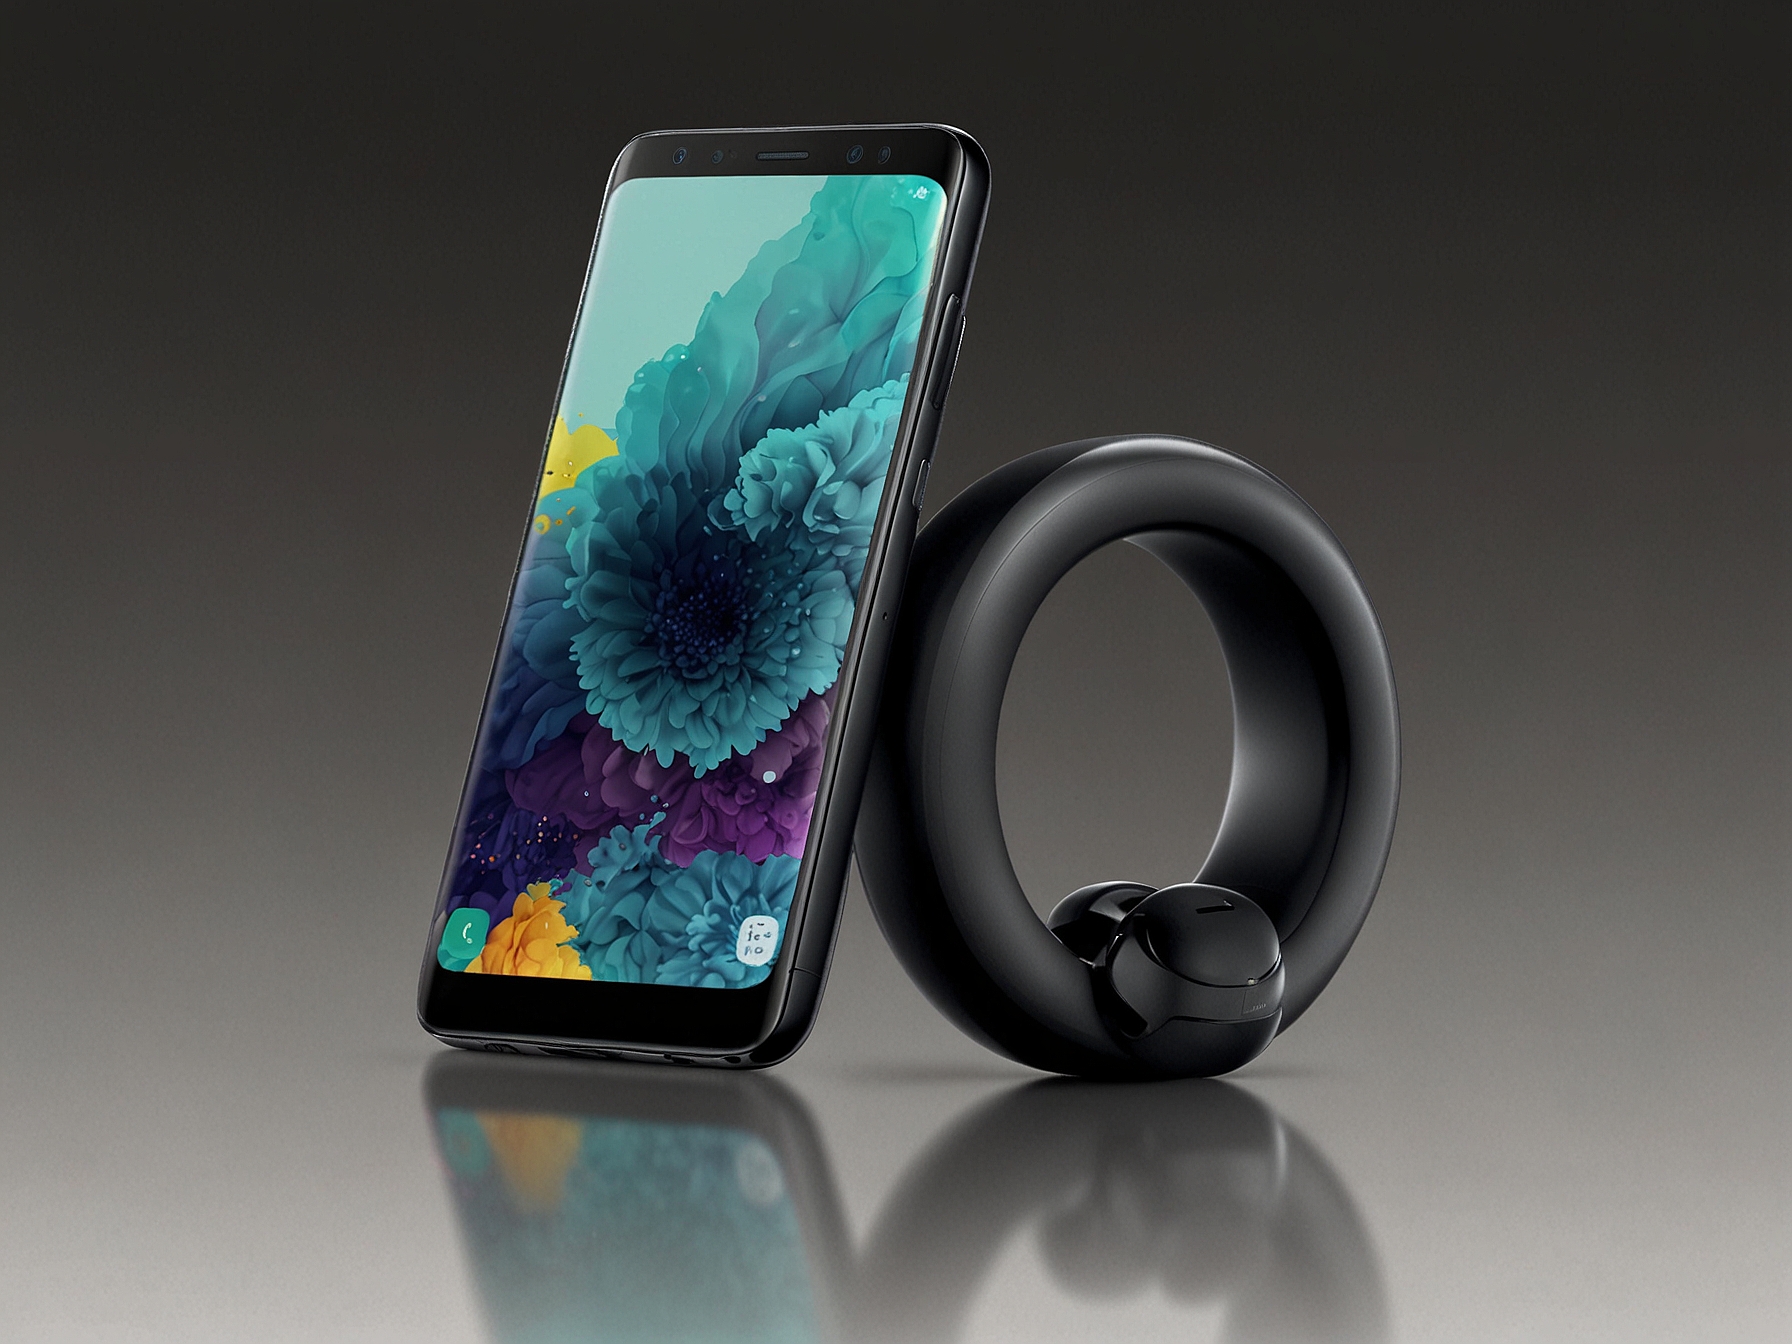 An image showcasing the sleek design of the Samsung Galaxy Ring alongside its compact, earbud-like charging case, highlighting the novel charging method and the ring's portability.